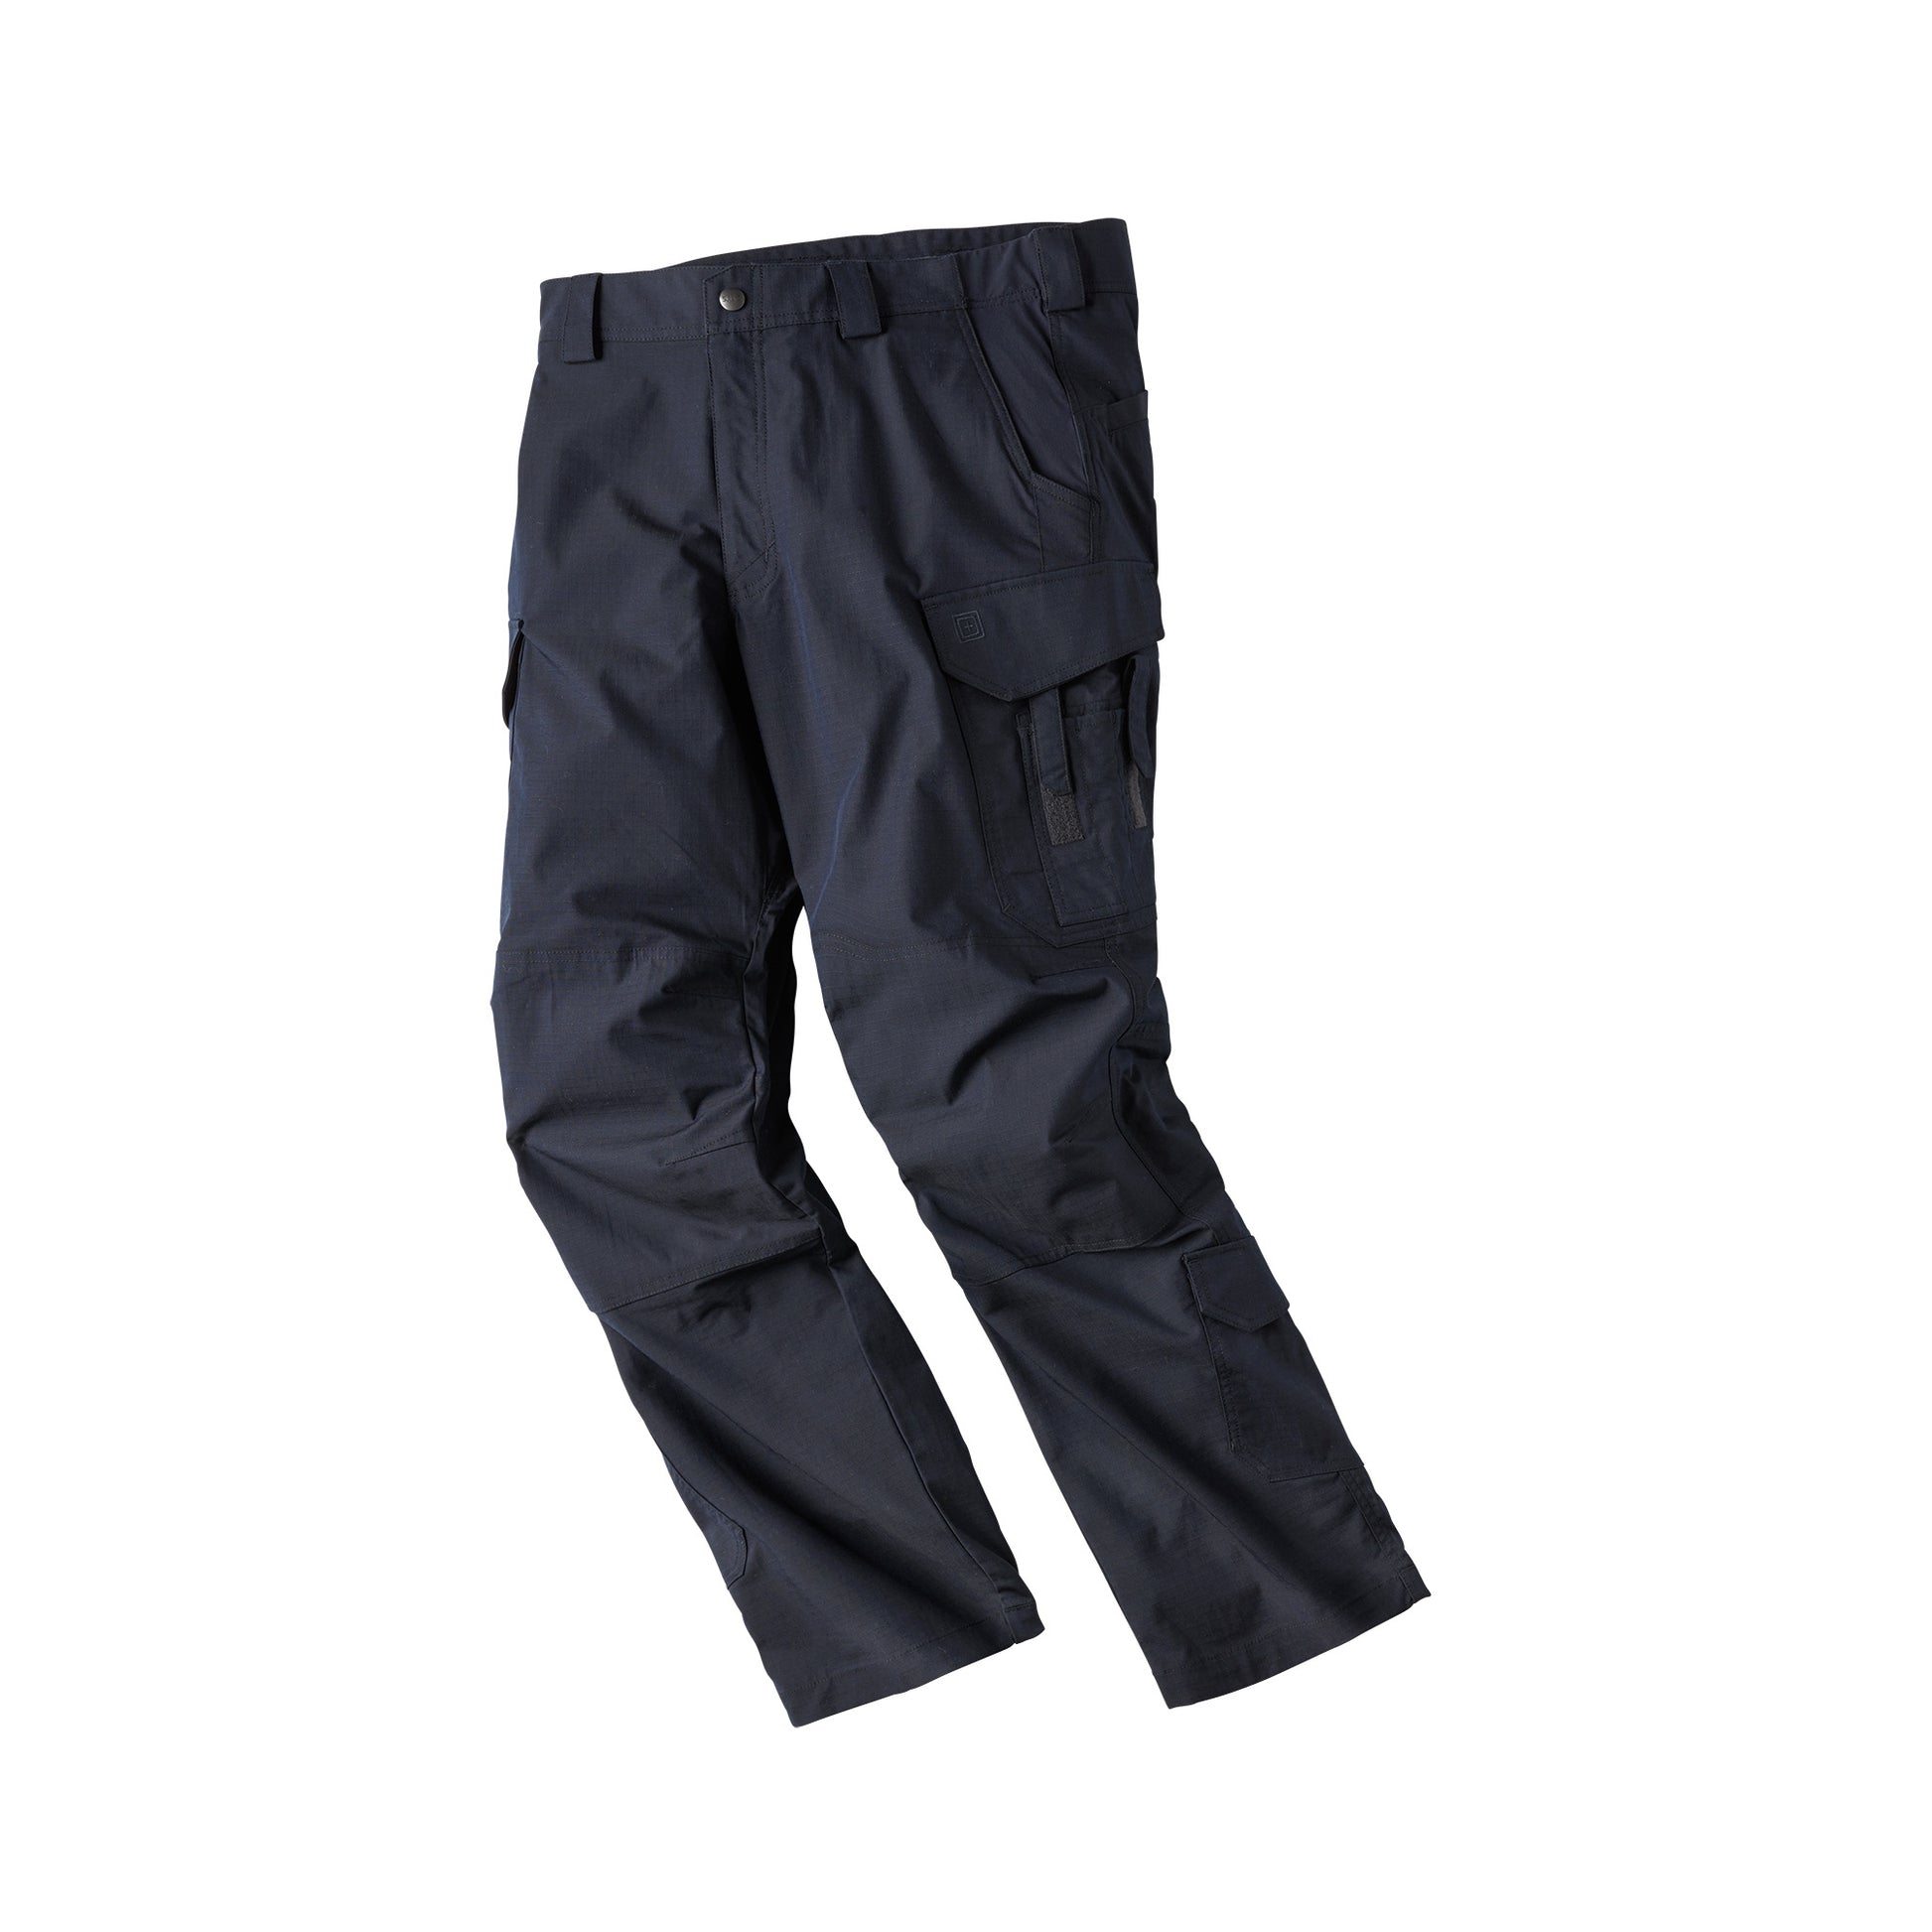 5.11 EMS Trousers, 5.11 Tactical Trousers & Pants